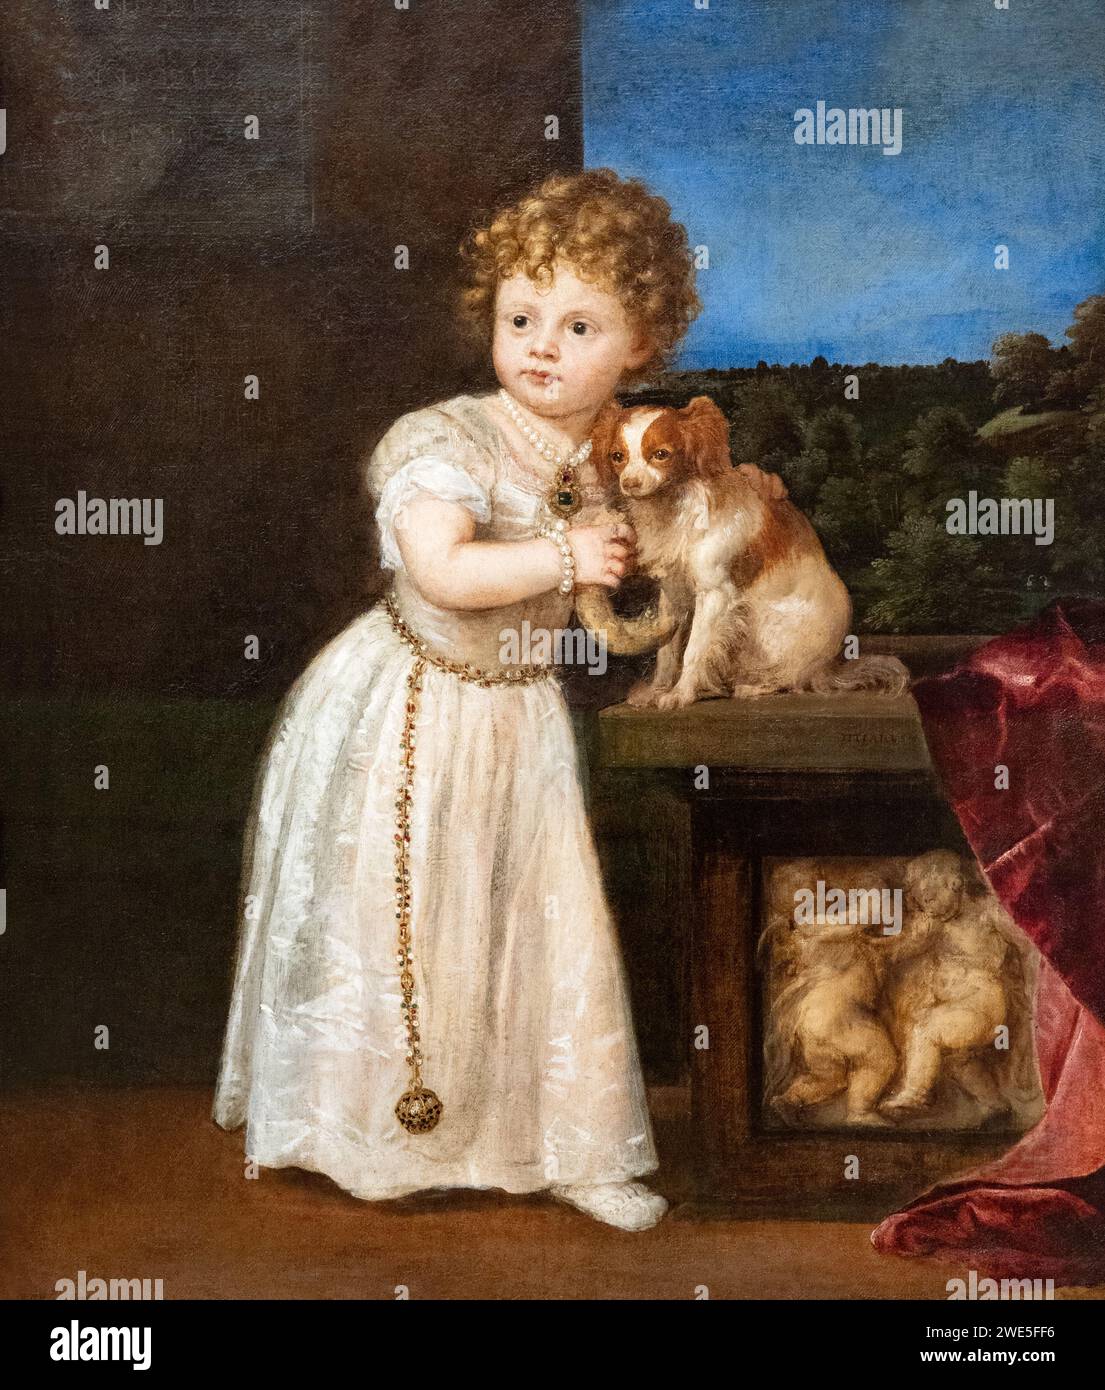 Titian painting; 'Clarissa Strozzi at the age of Two', 1542; Italian Renaissance portrait, one of the earliest portraits of a child. 16th century. Stock Photo